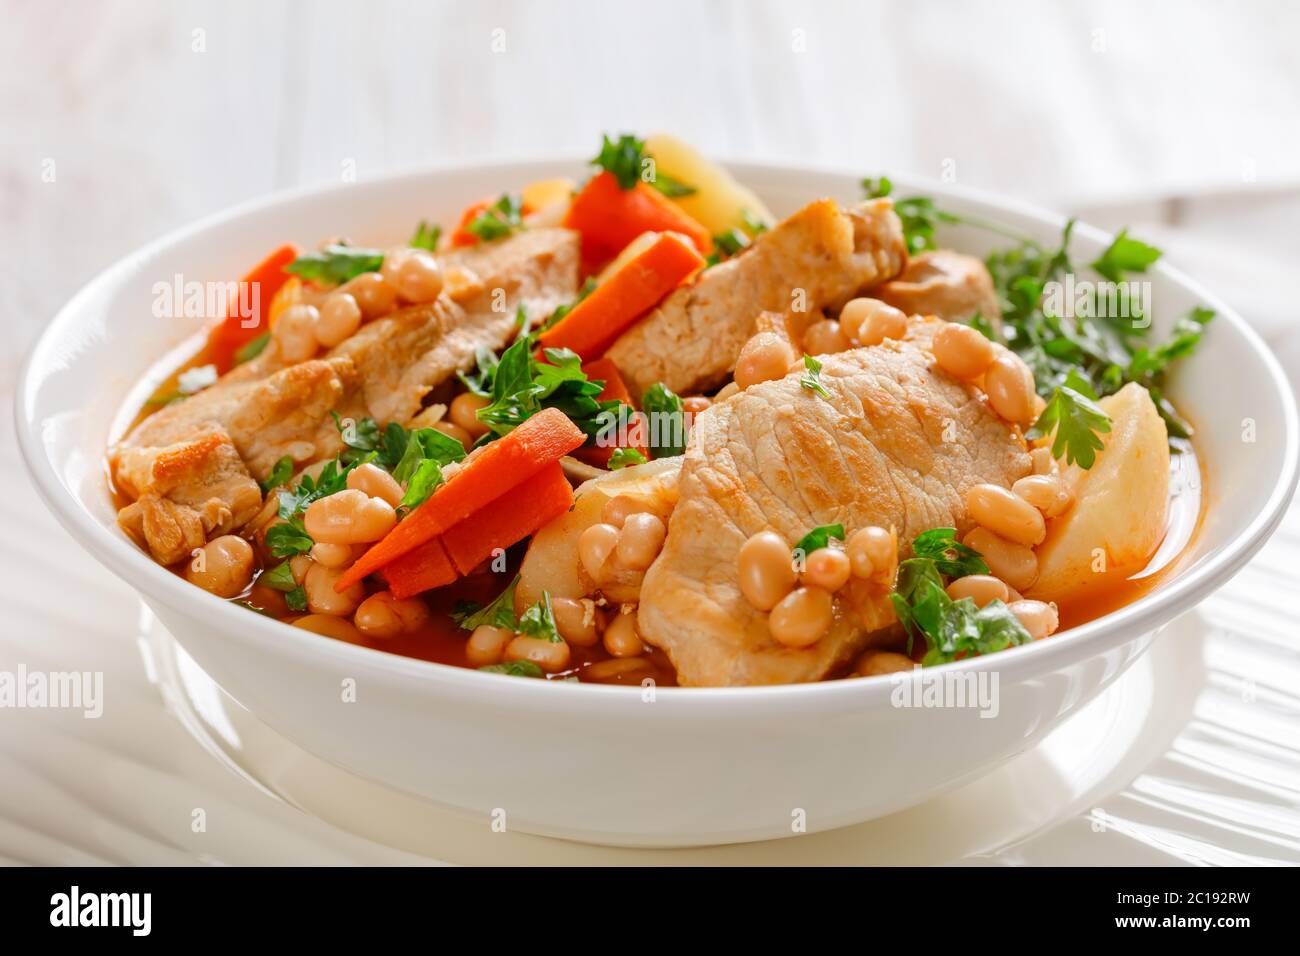 close-up of a portion of white bean, vegetables and pork stew in a white bowl on a rustic table, landscape view from above, Stock Photo